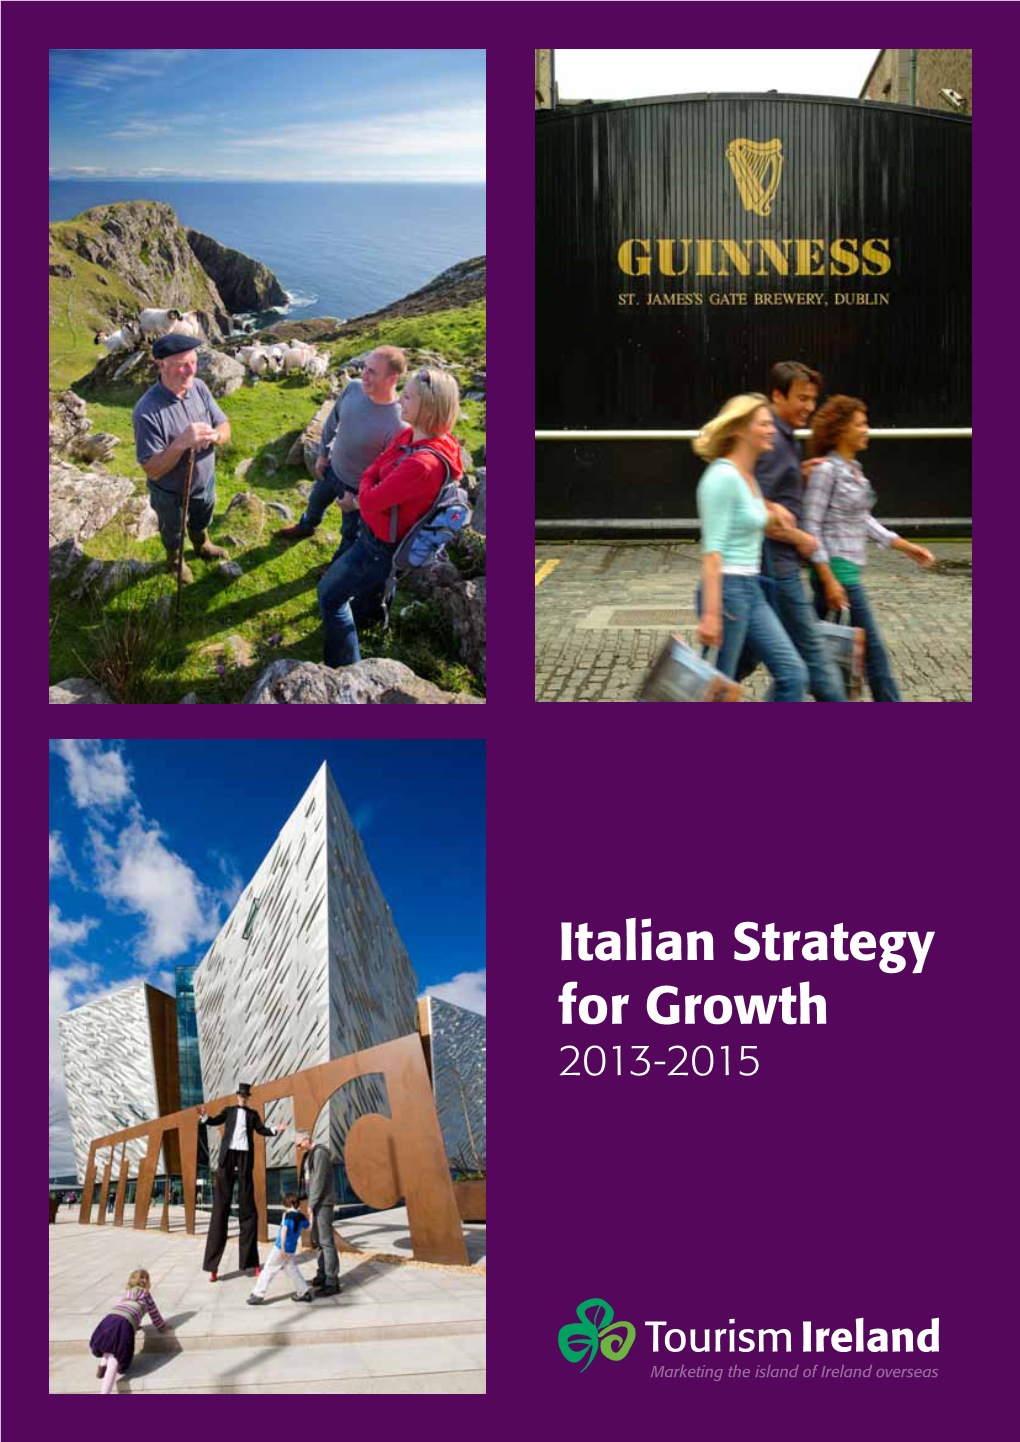 Italian Strategy for Growth 2013-2015 Overview Italy: Driving Growth 2013-2015 Italy